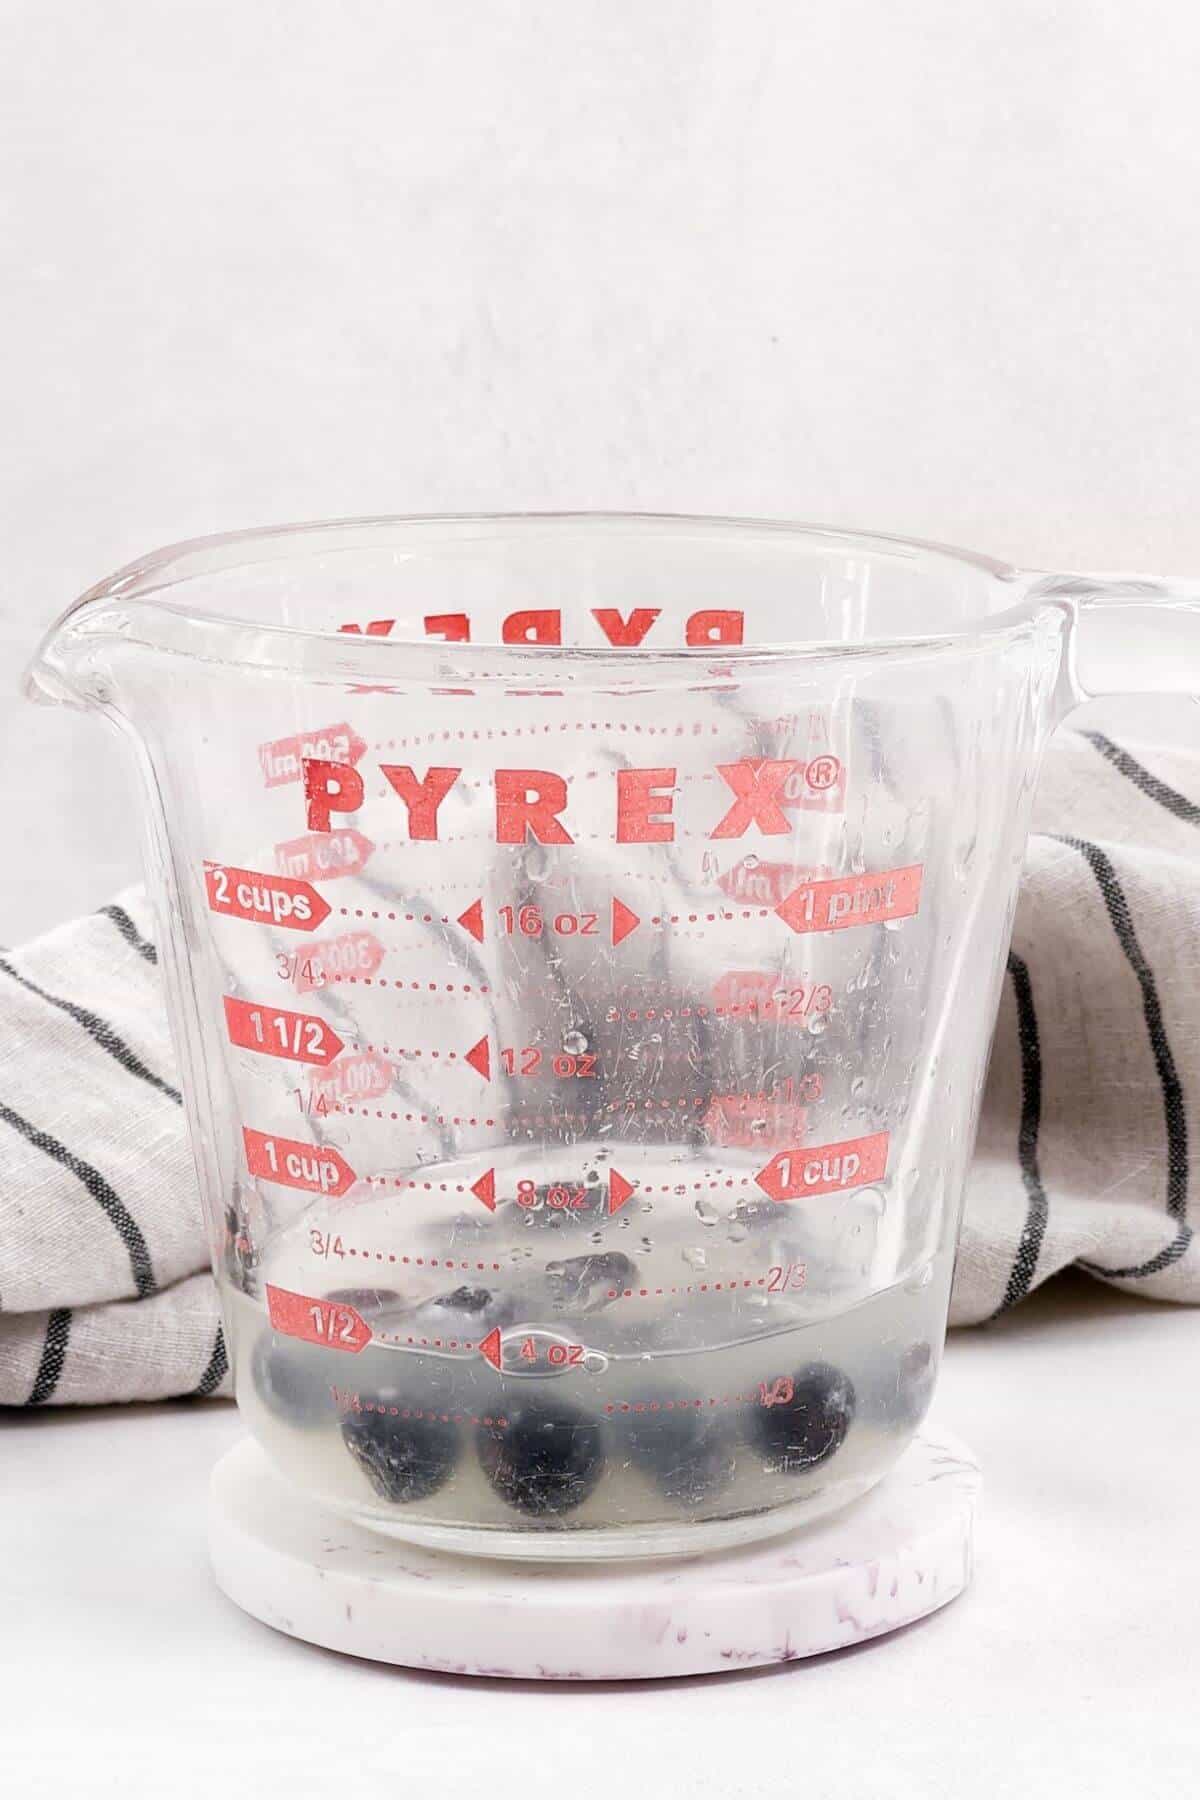 Blueberries added to Pyrex measuring cup.